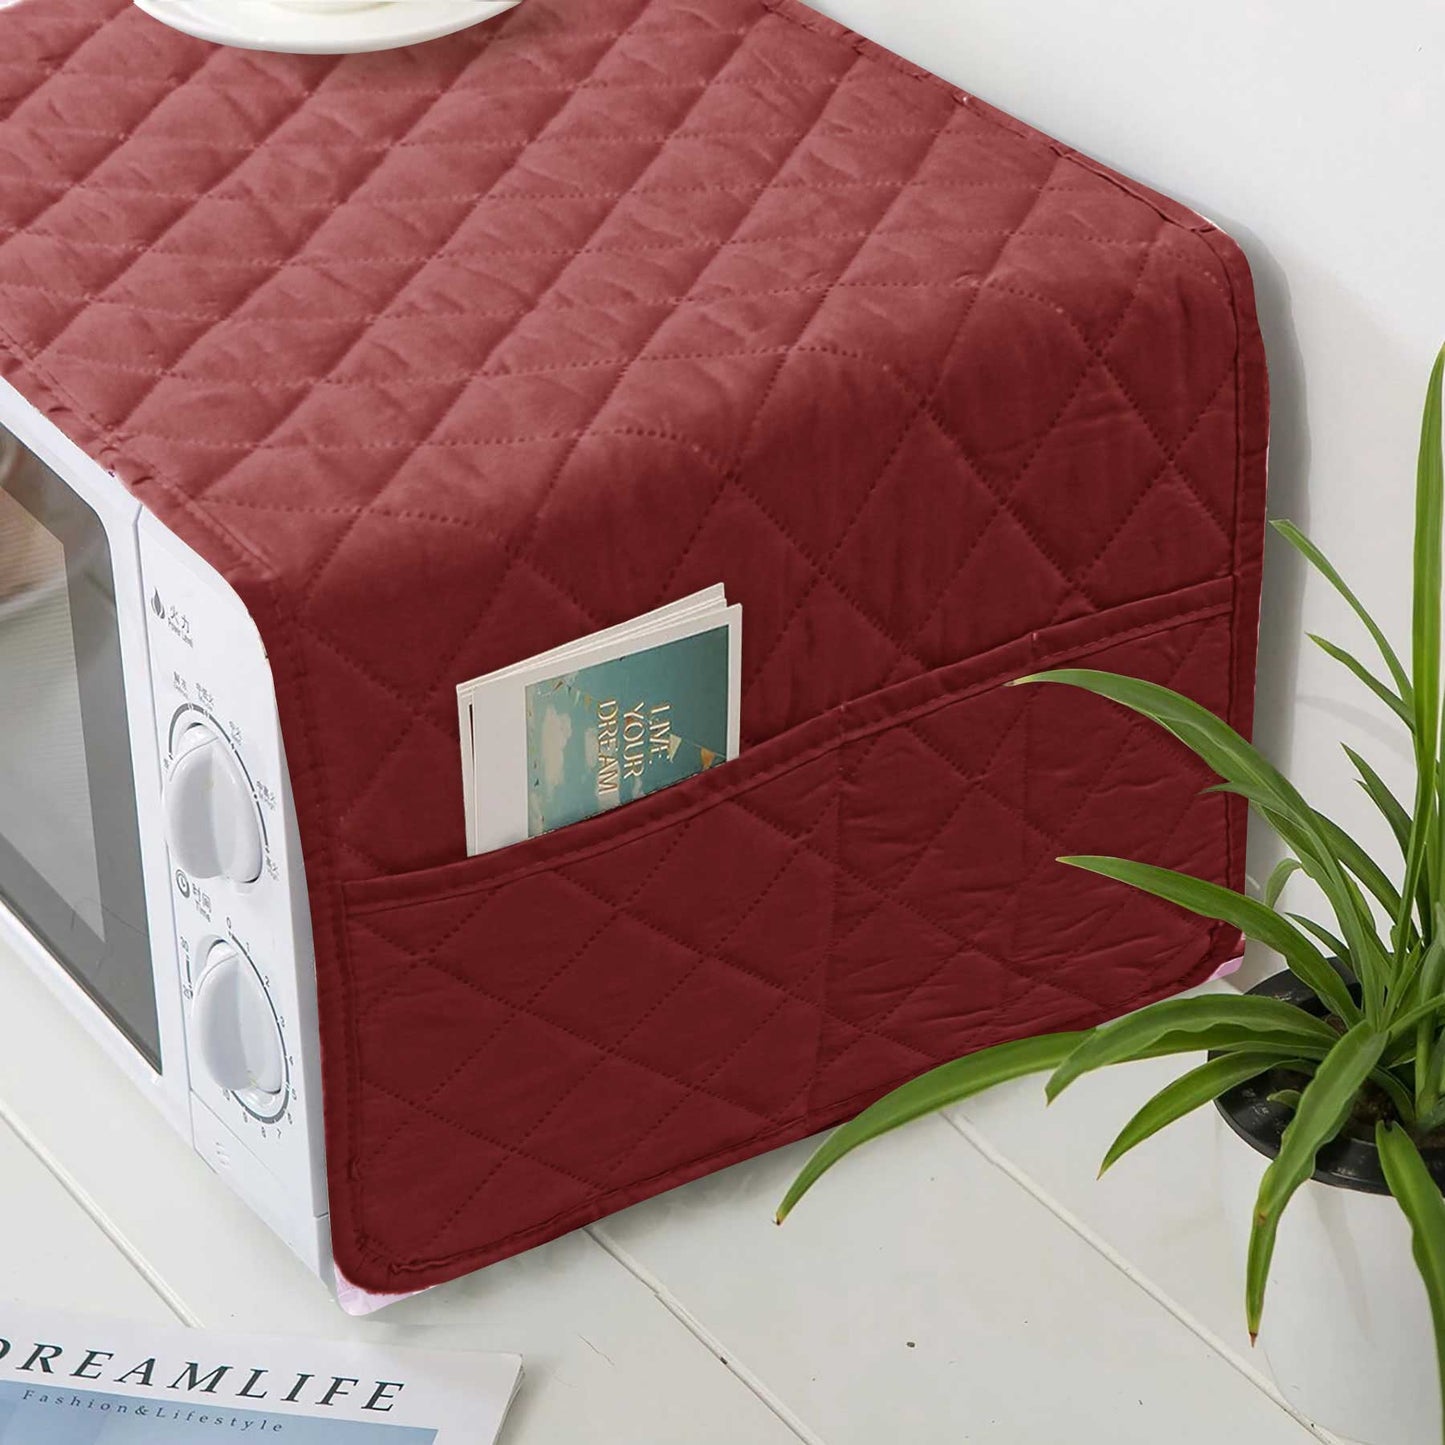 Dust-Proof Quilted Microwave Oven Cover With Side Pockets-Maroon